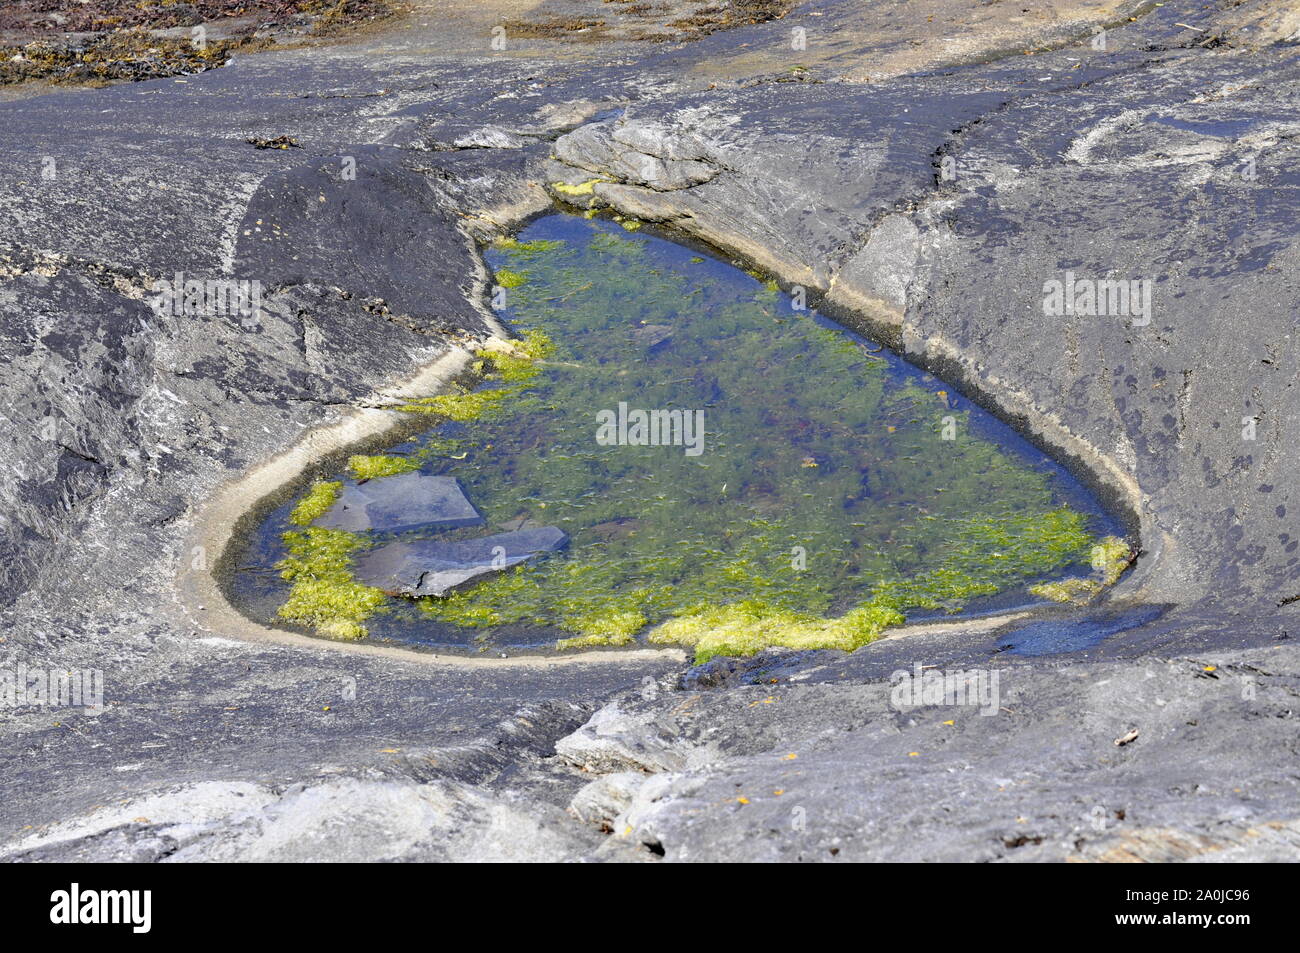 Seascape with heartshaped pond filled with green seaweed Stock Photo